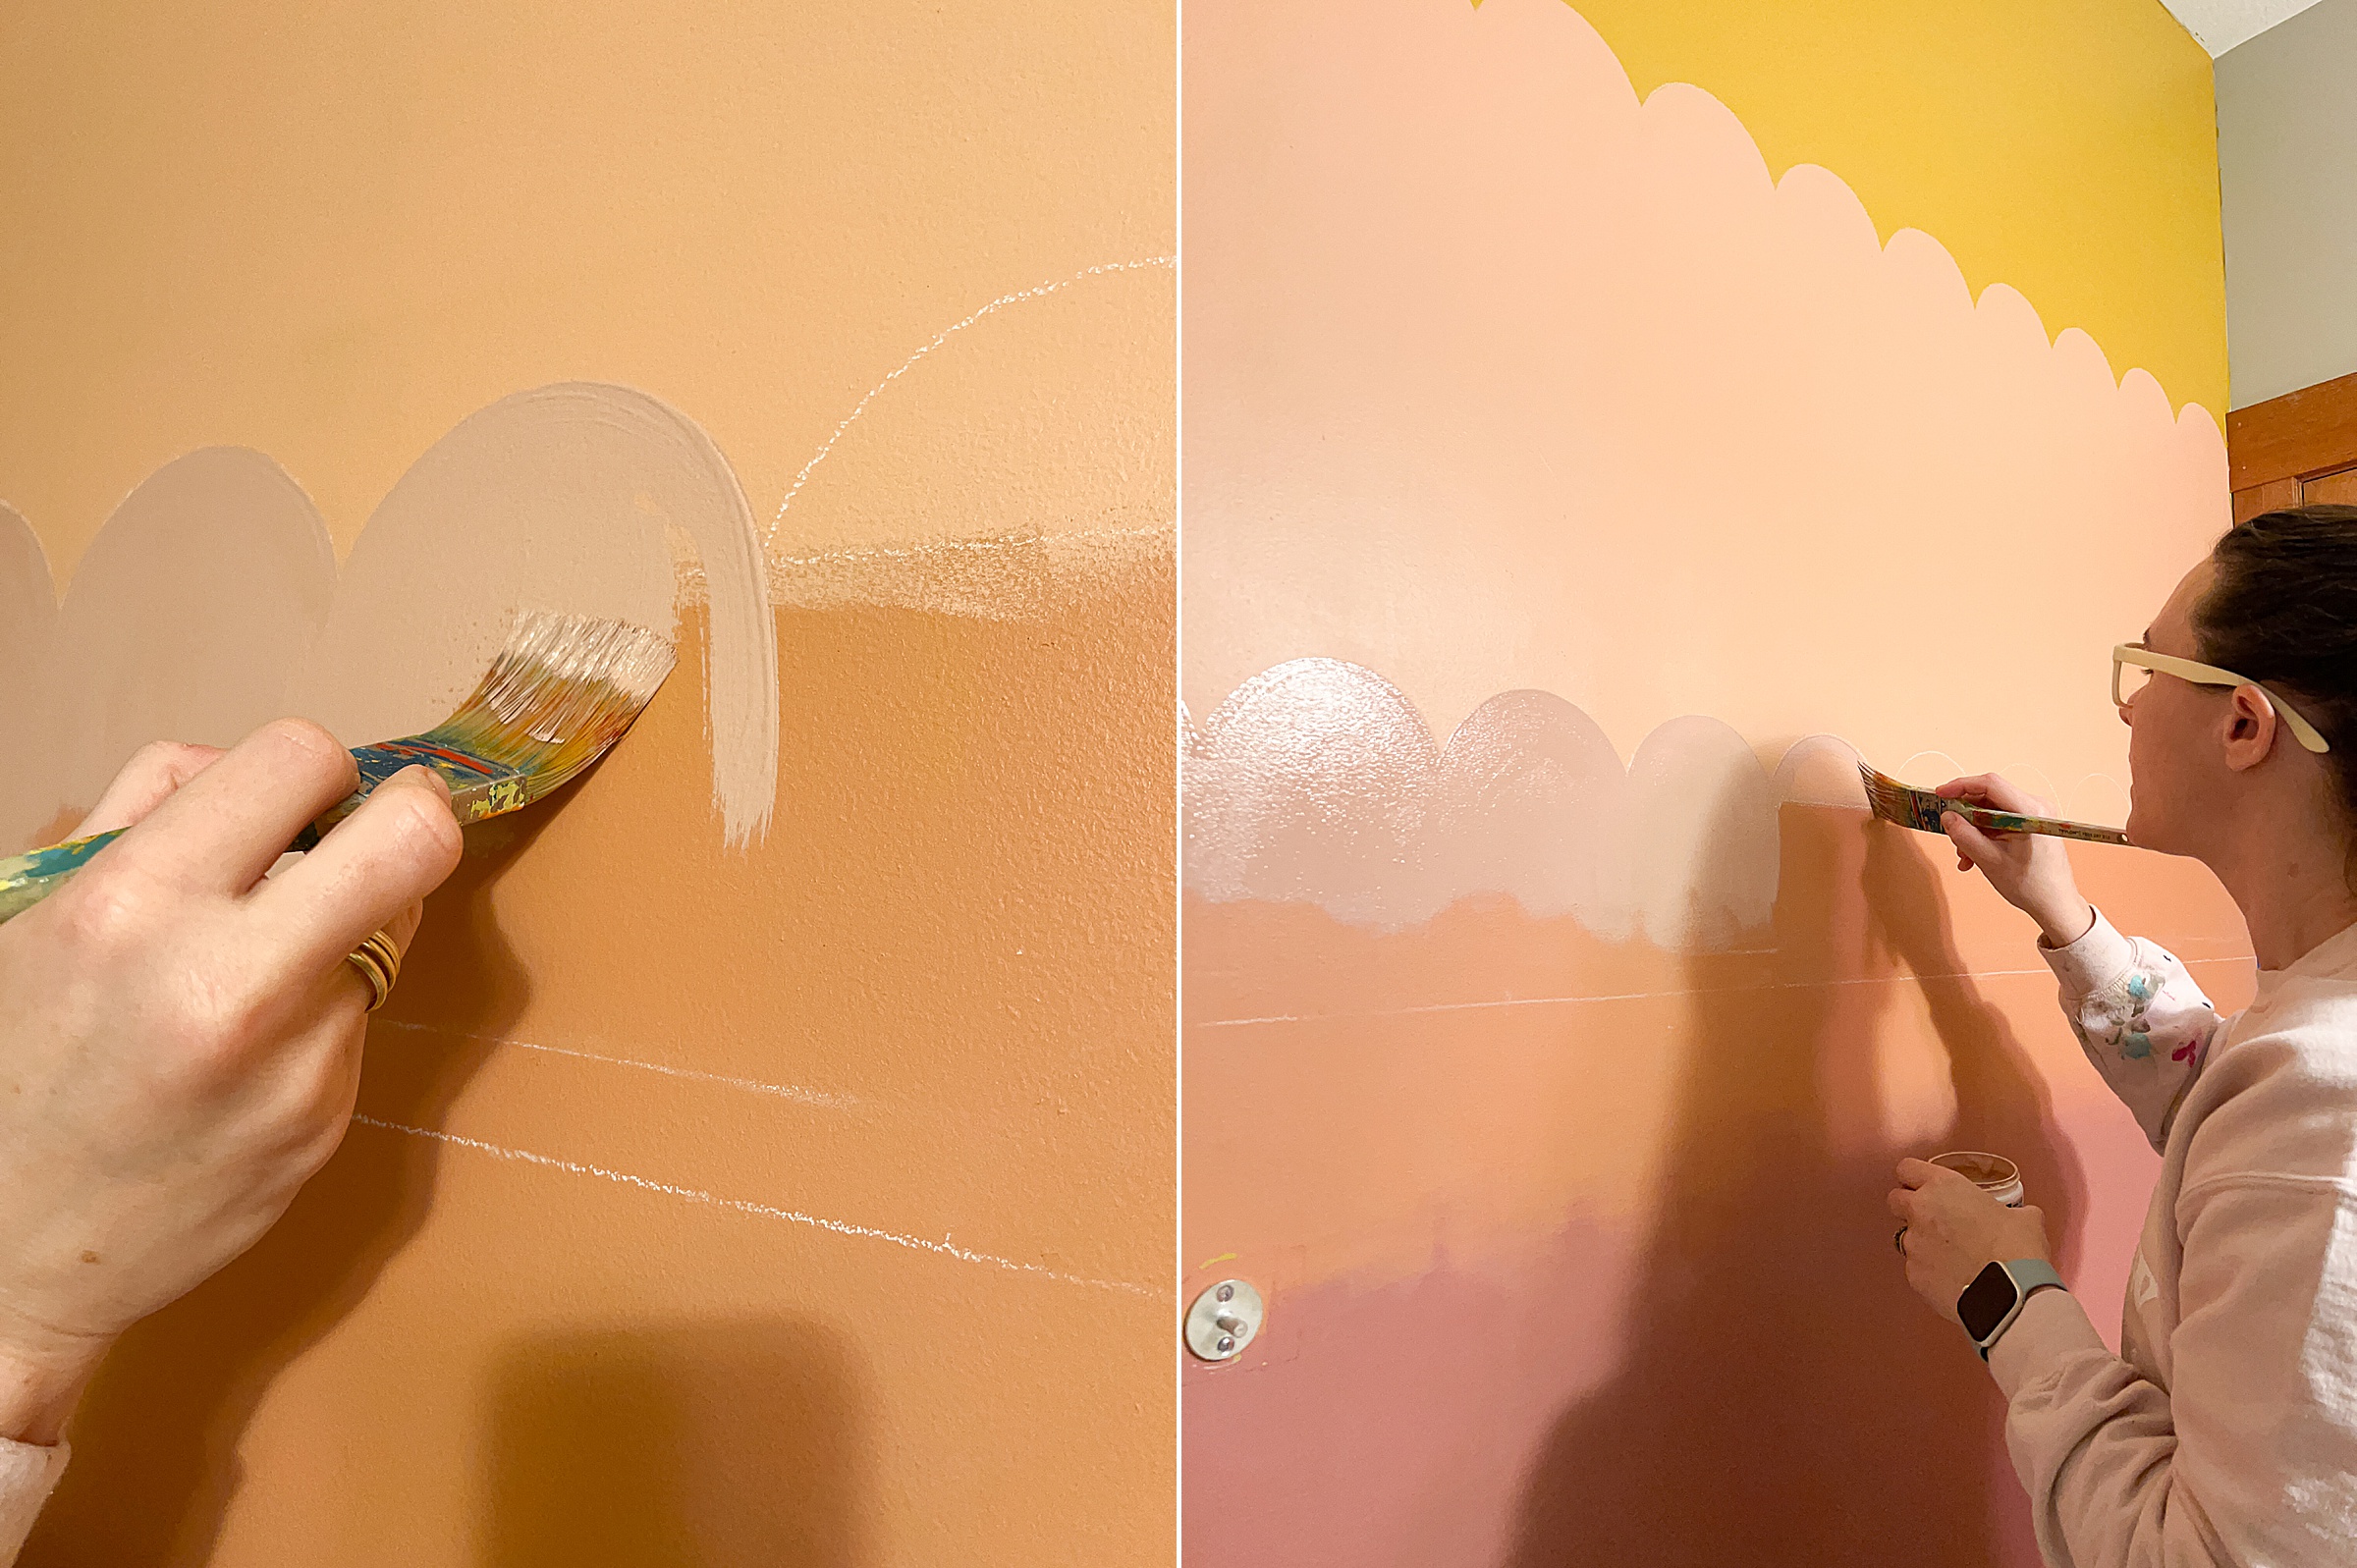 Scalloped wall painting DIY, how to paint easy scallops on the walls, how to paint scallops, bathroom mural ideas, how to paint a bathroom mural